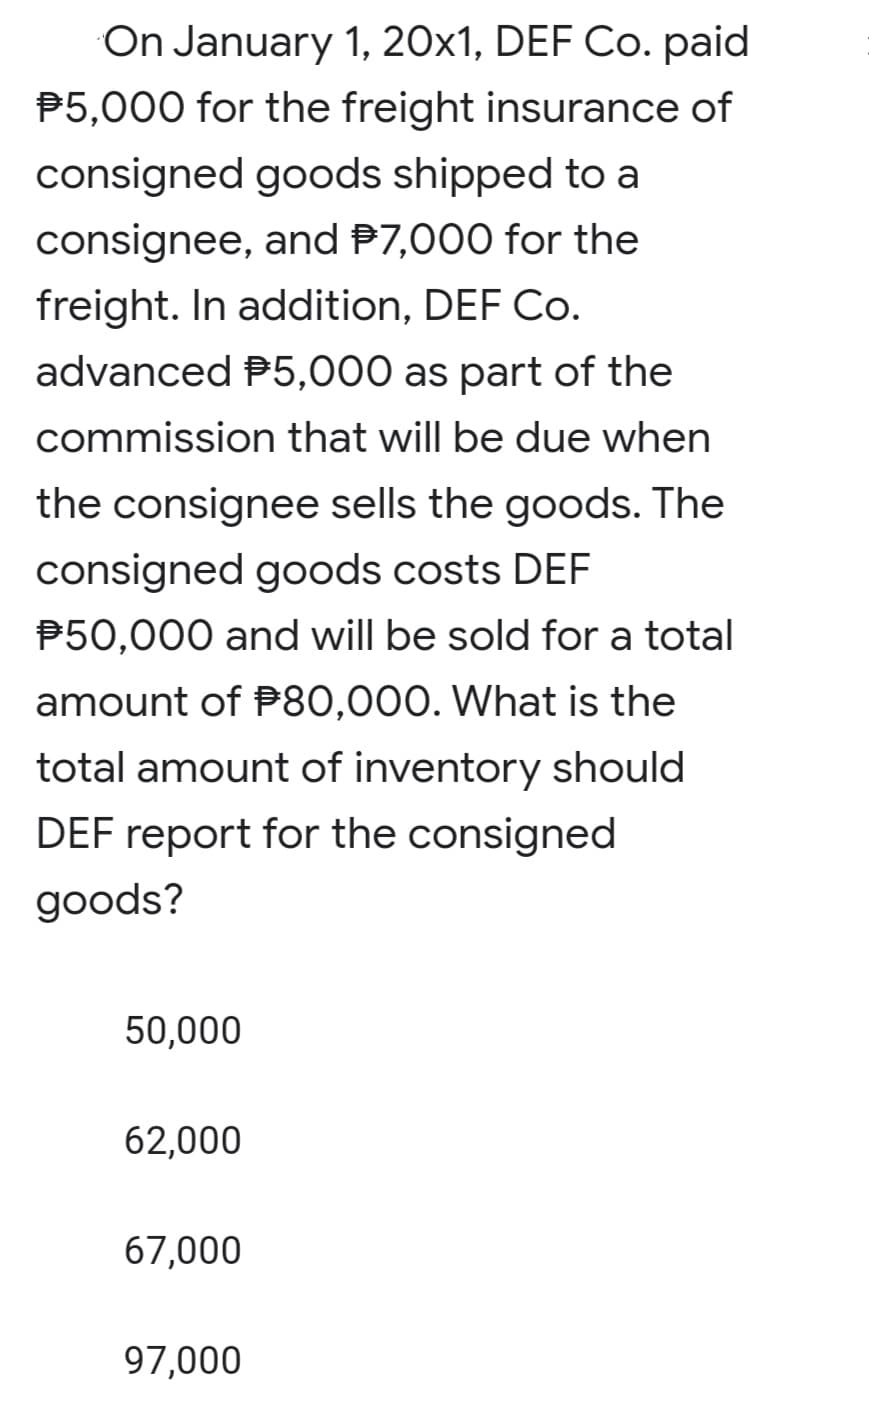 On January 1, 20x1, DEF Co. paid
P5,000 for the freight insurance of
consigned goods shipped to a
consignee, and P7,000 for the
freight. In addition, DEF Co.
advanced P5,000 as part of the
commission that will be due when
the consignee sells the goods. The
consigned goods costs DEF
P50,000 and will be sold for a total
amount of P80,000. What is the
total amount of inventory should
DEF report for the consigned
goods?
50,000
62,000
67,000
97,000
